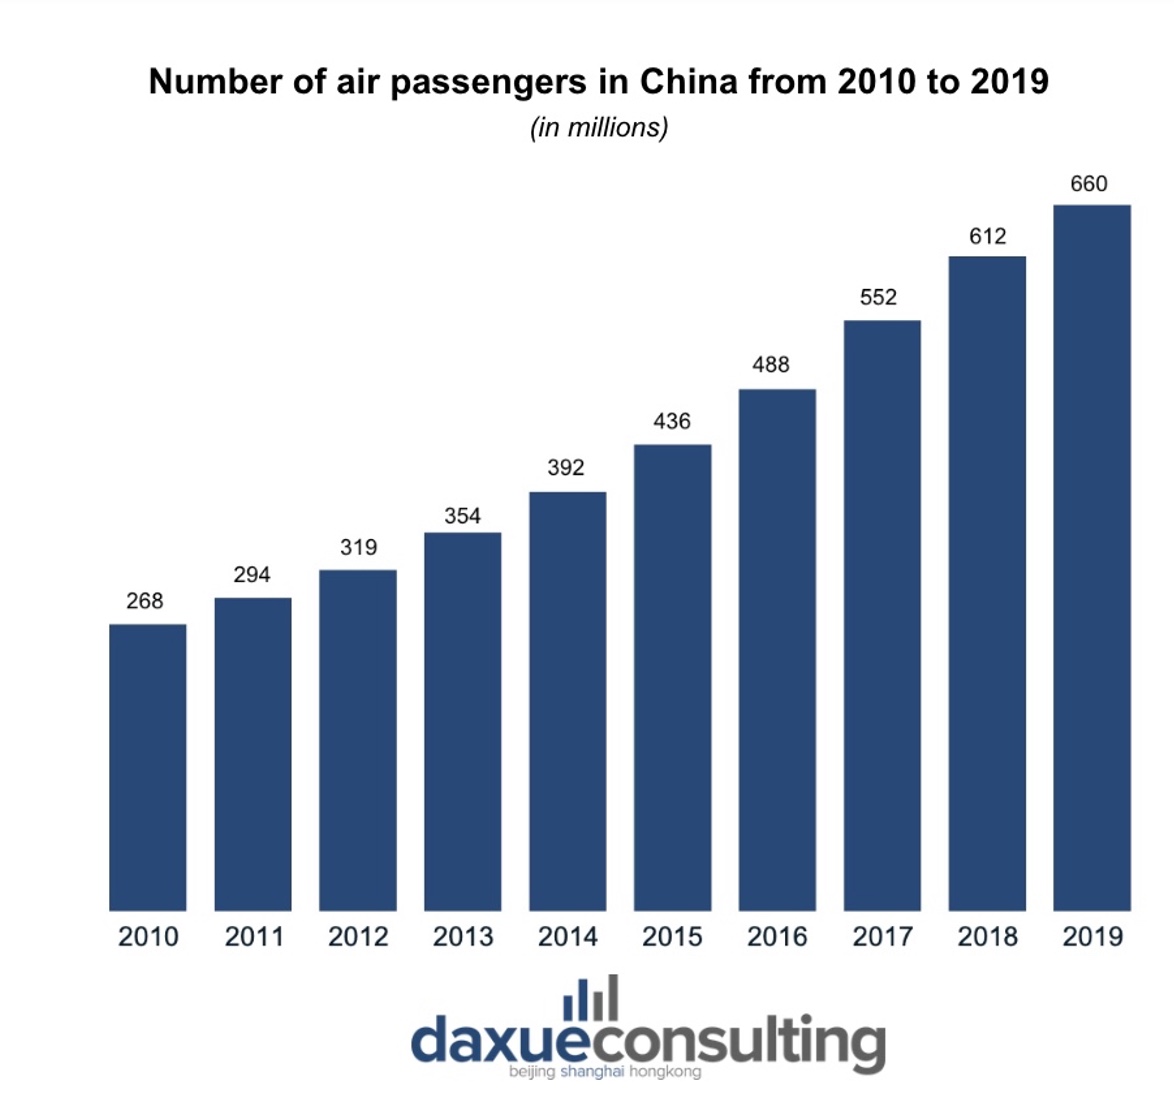 number of air passengers in China from 2010 to 2019